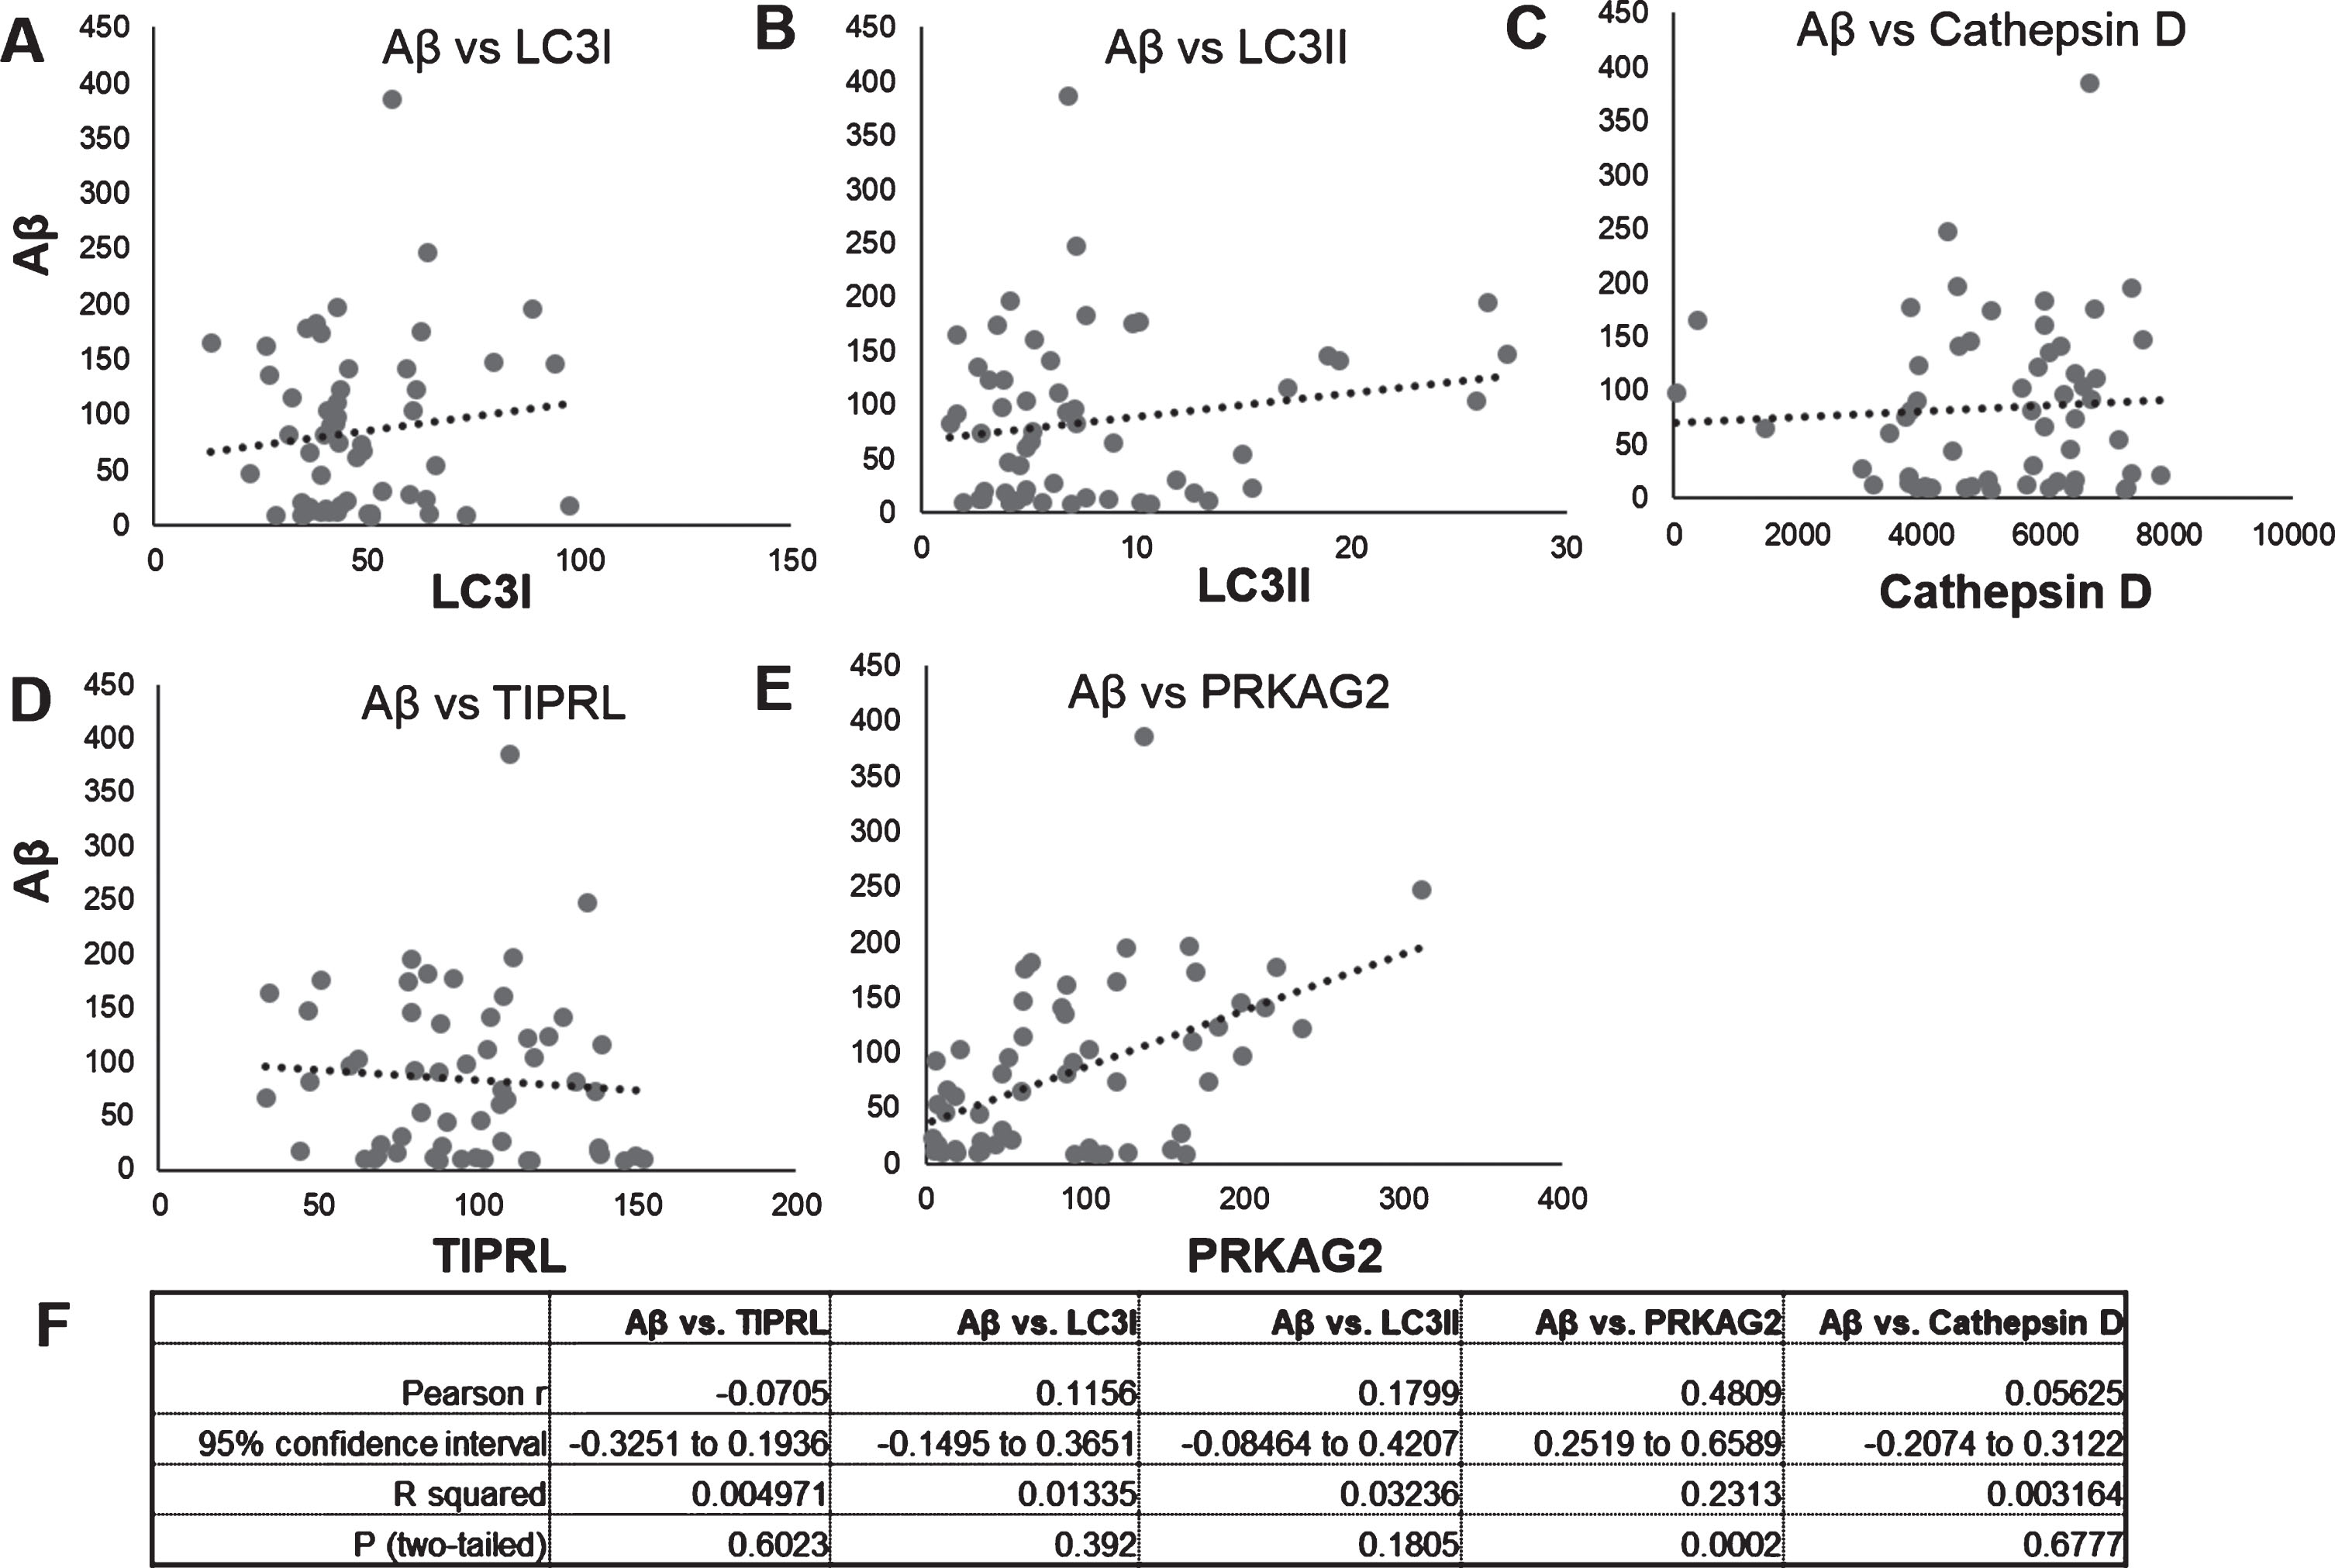 Correlation of Aβ and autophagy proteins LC3, Cathepsin D, PRKAG2, and TIPRL mRNA and protein levels. Correlation of Aβ protein levels (Fig. 2) to protein levels of LC3B isoforms, LC3I (Fig. 2C), LC3II (Fig. 2D), mature Cathepsin D (Fig. 2E), PRKAG2 (Fig. 3C), and TIPRL (Fig. 3D) was done using Pearsons correlation analysis. Aβ levels positively correlated to PRKAG2 levels (r = 0.4809, p < 0005).